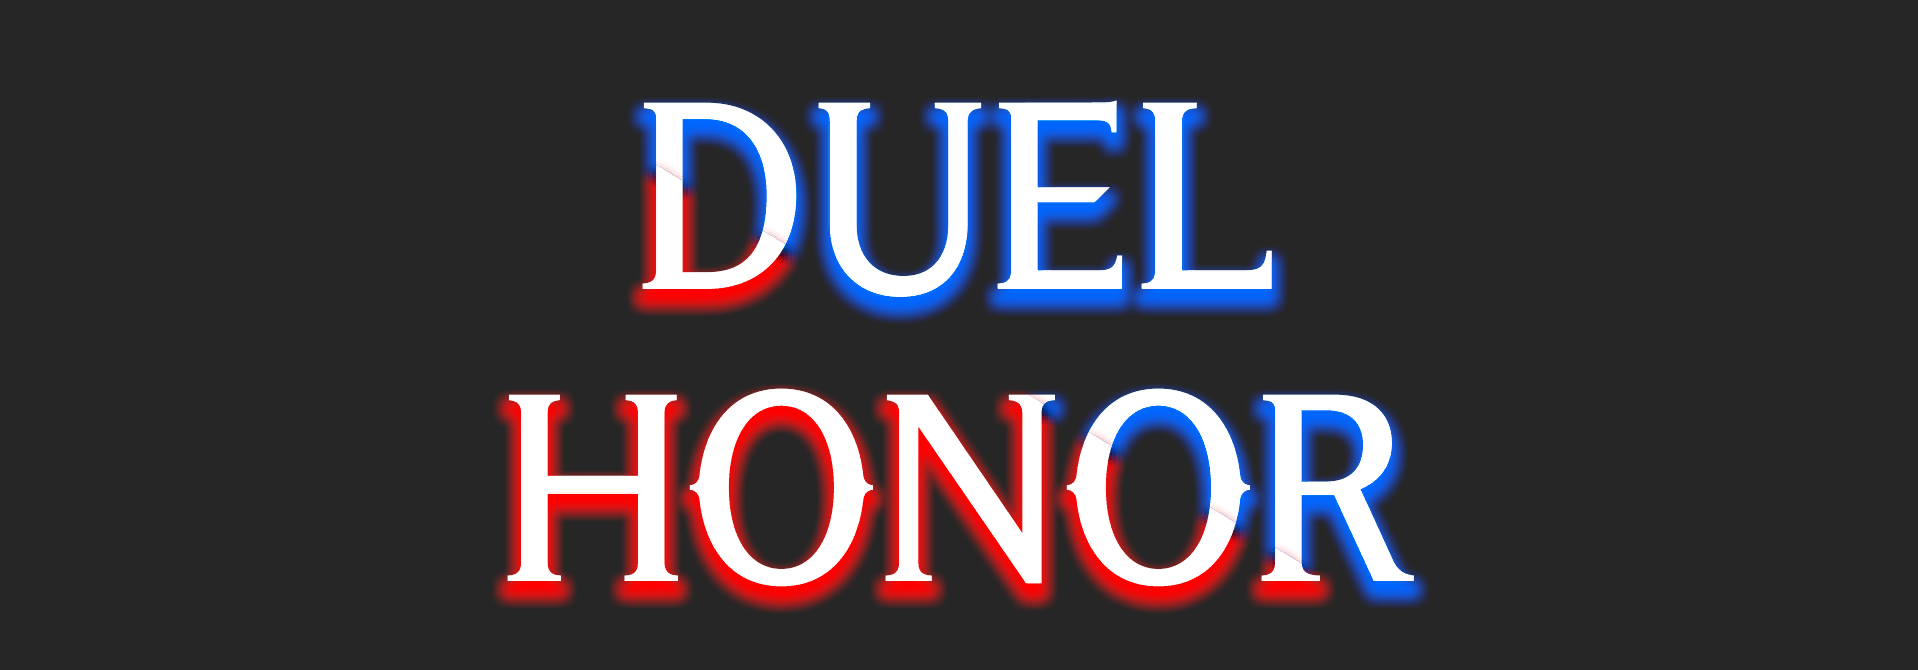 Duel Honor